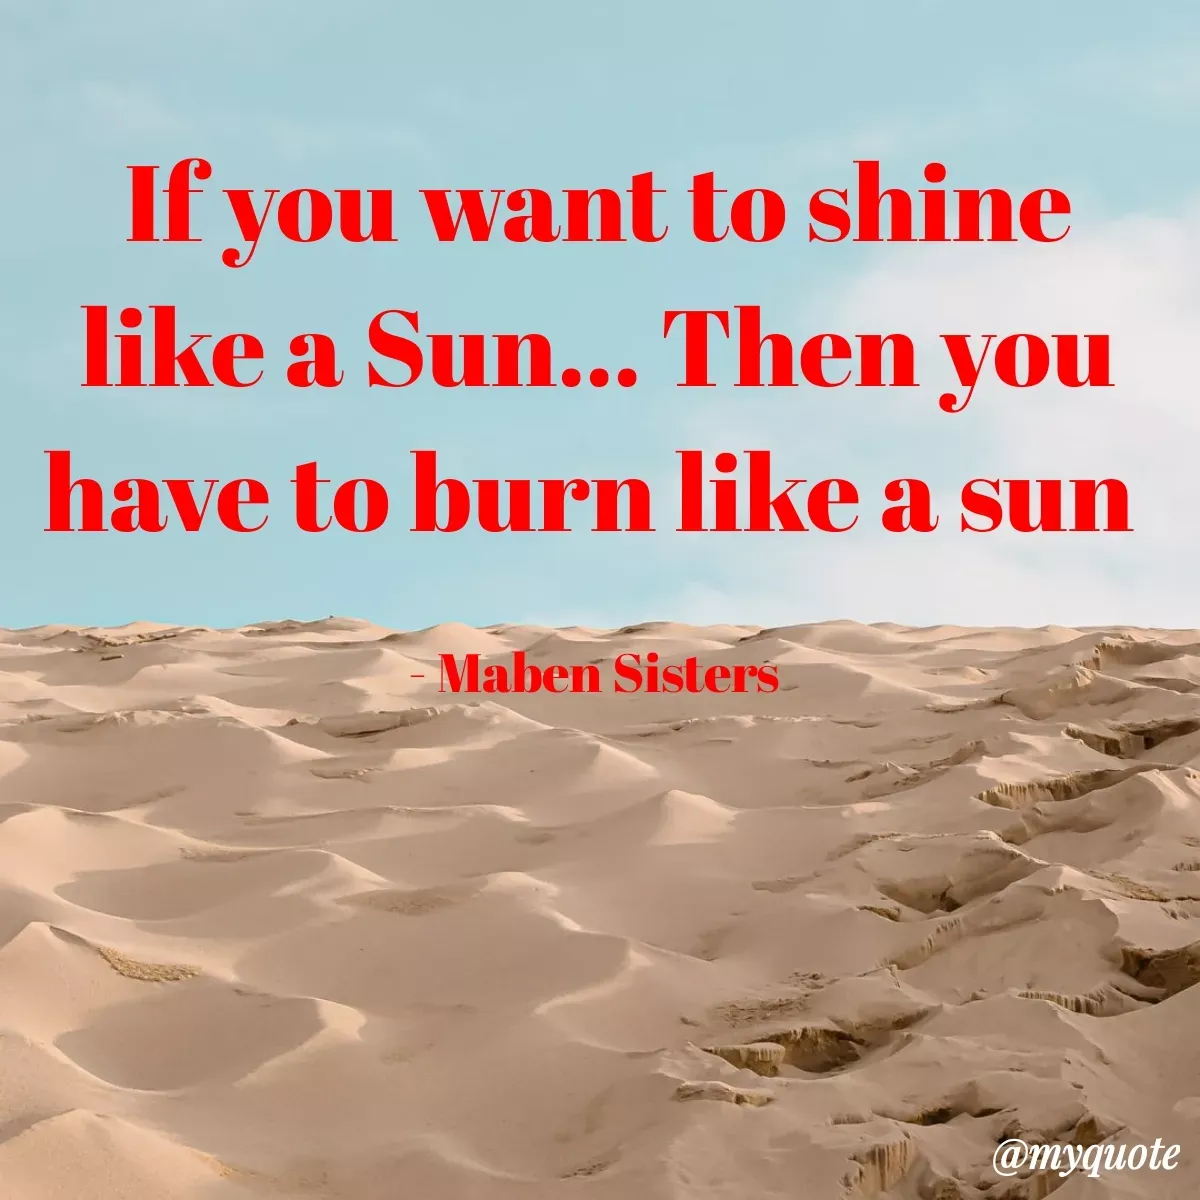 Quote by Maben Sisters - If you want to shine
like a Sun... Then you
have to burn like a sun
Maben Sisters
a
@myquote
 - Made using Quotes Creator App, Post Maker App